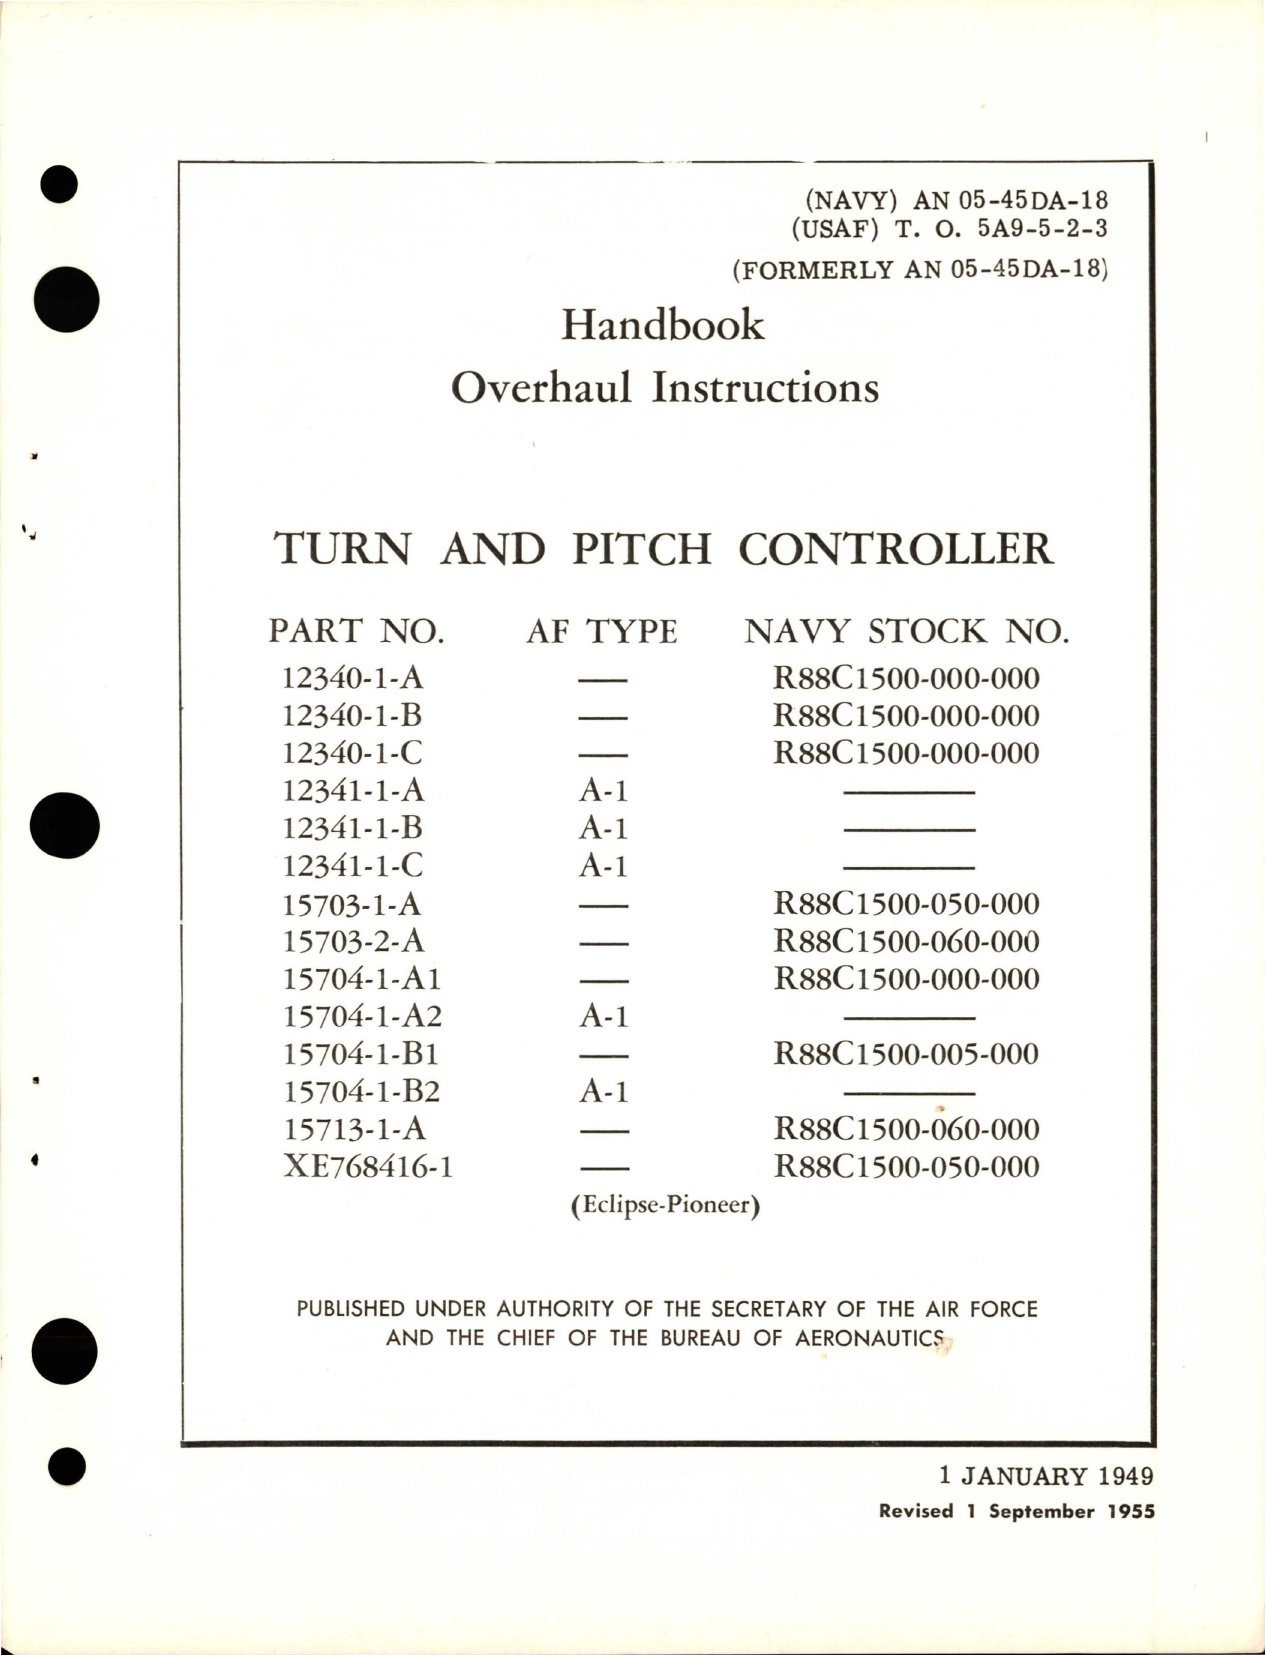 Sample page 1 from AirCorps Library document: Overhaul Instructions for Turn and Pitch Controller 